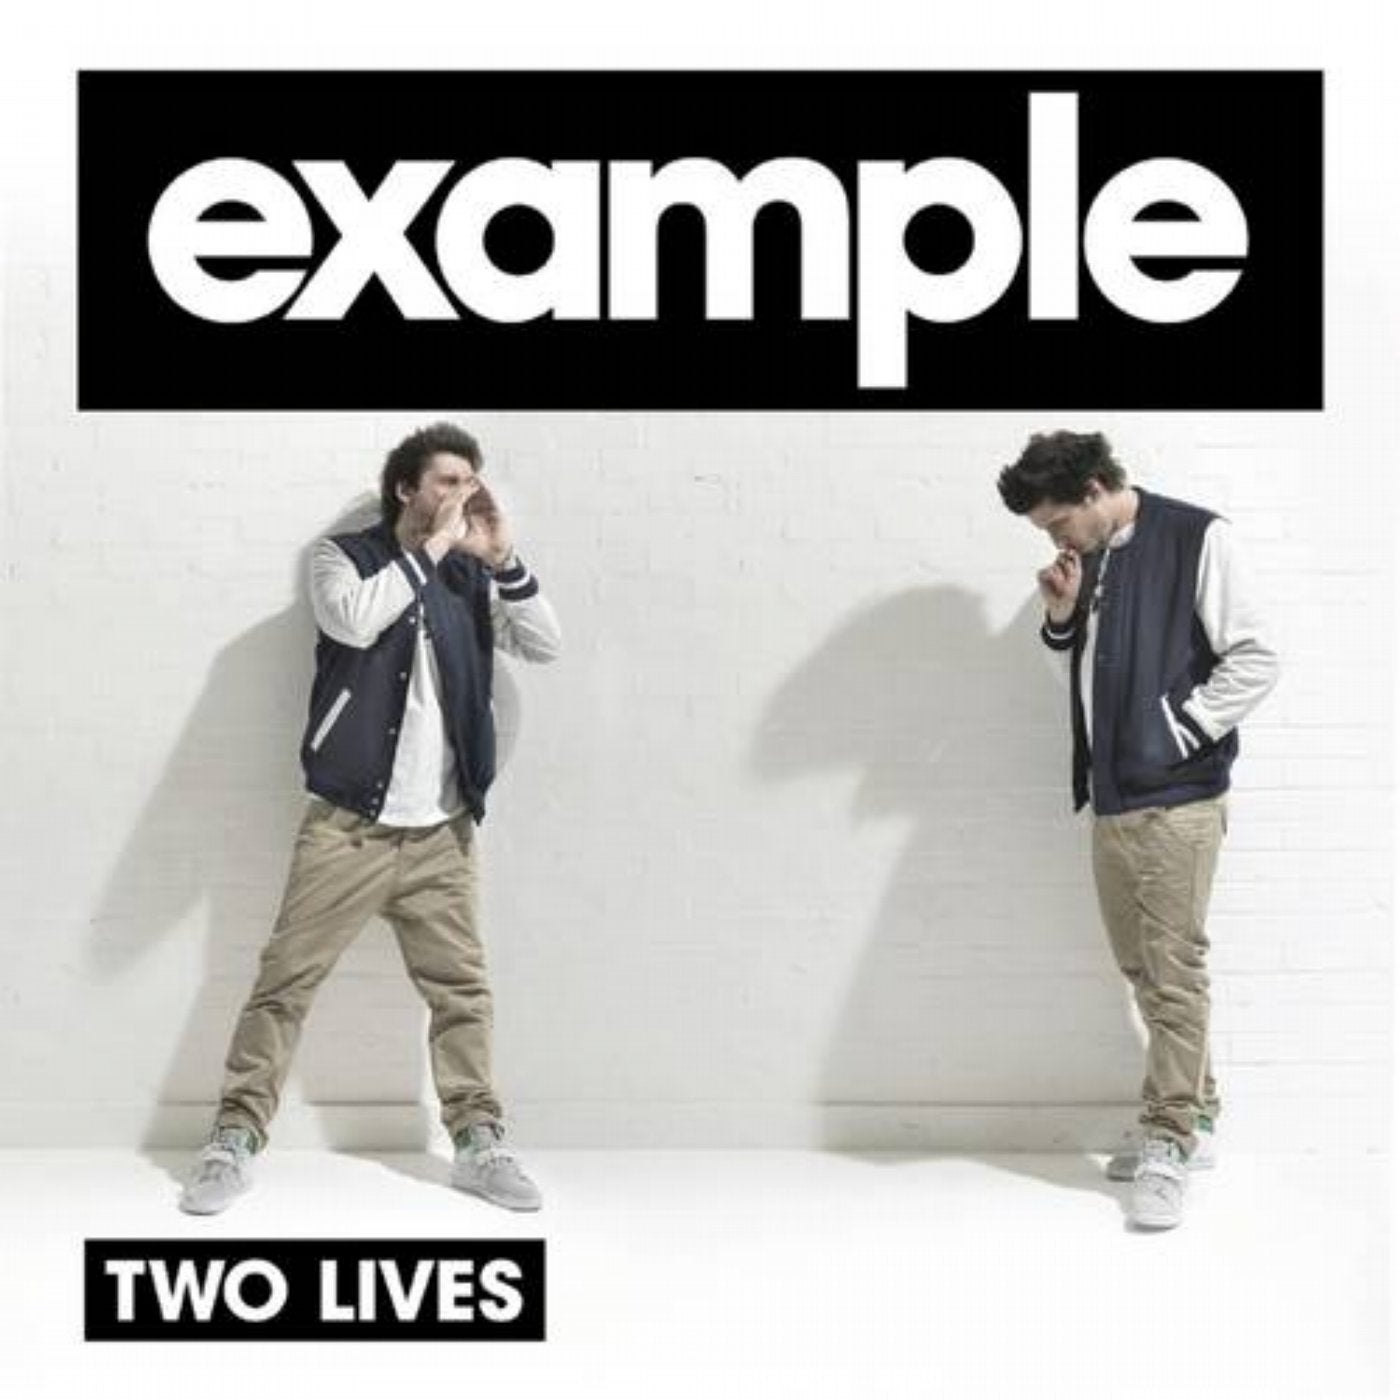 Life 2 live. Example альбомы. Example two Lives. Example Live Life Living. Example обложки.